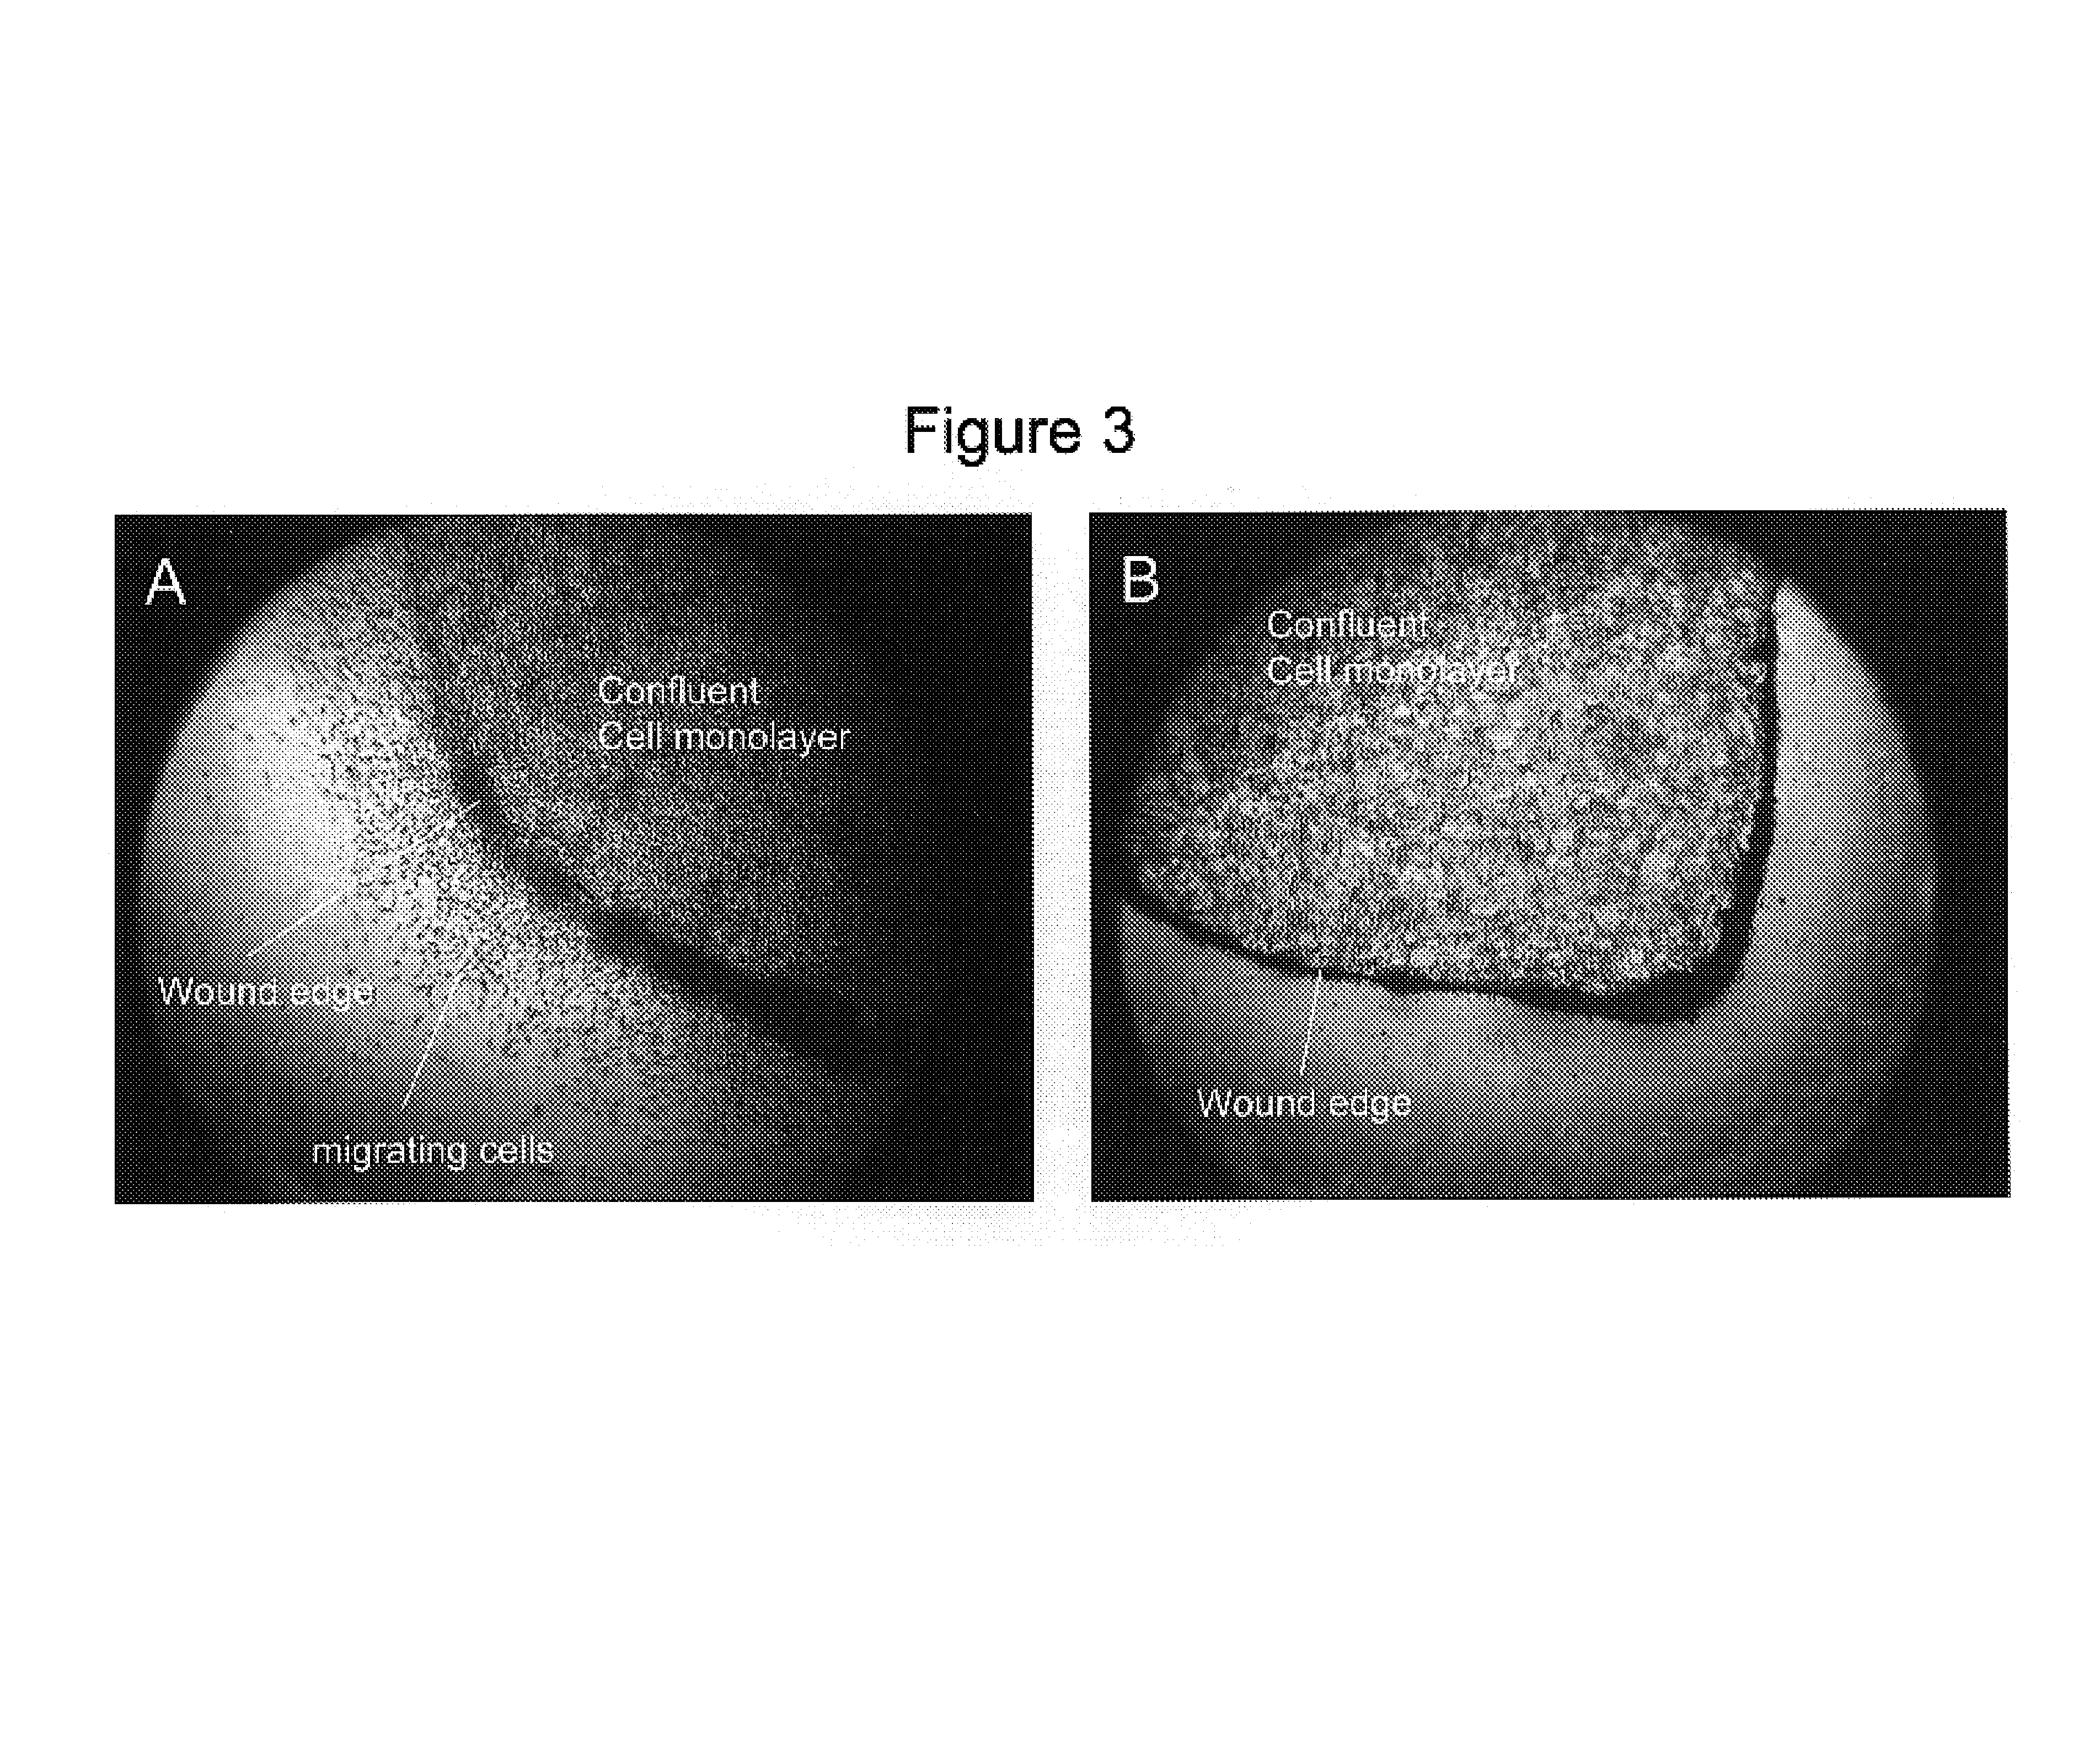 Methods for inhibiting cancer and scar formation